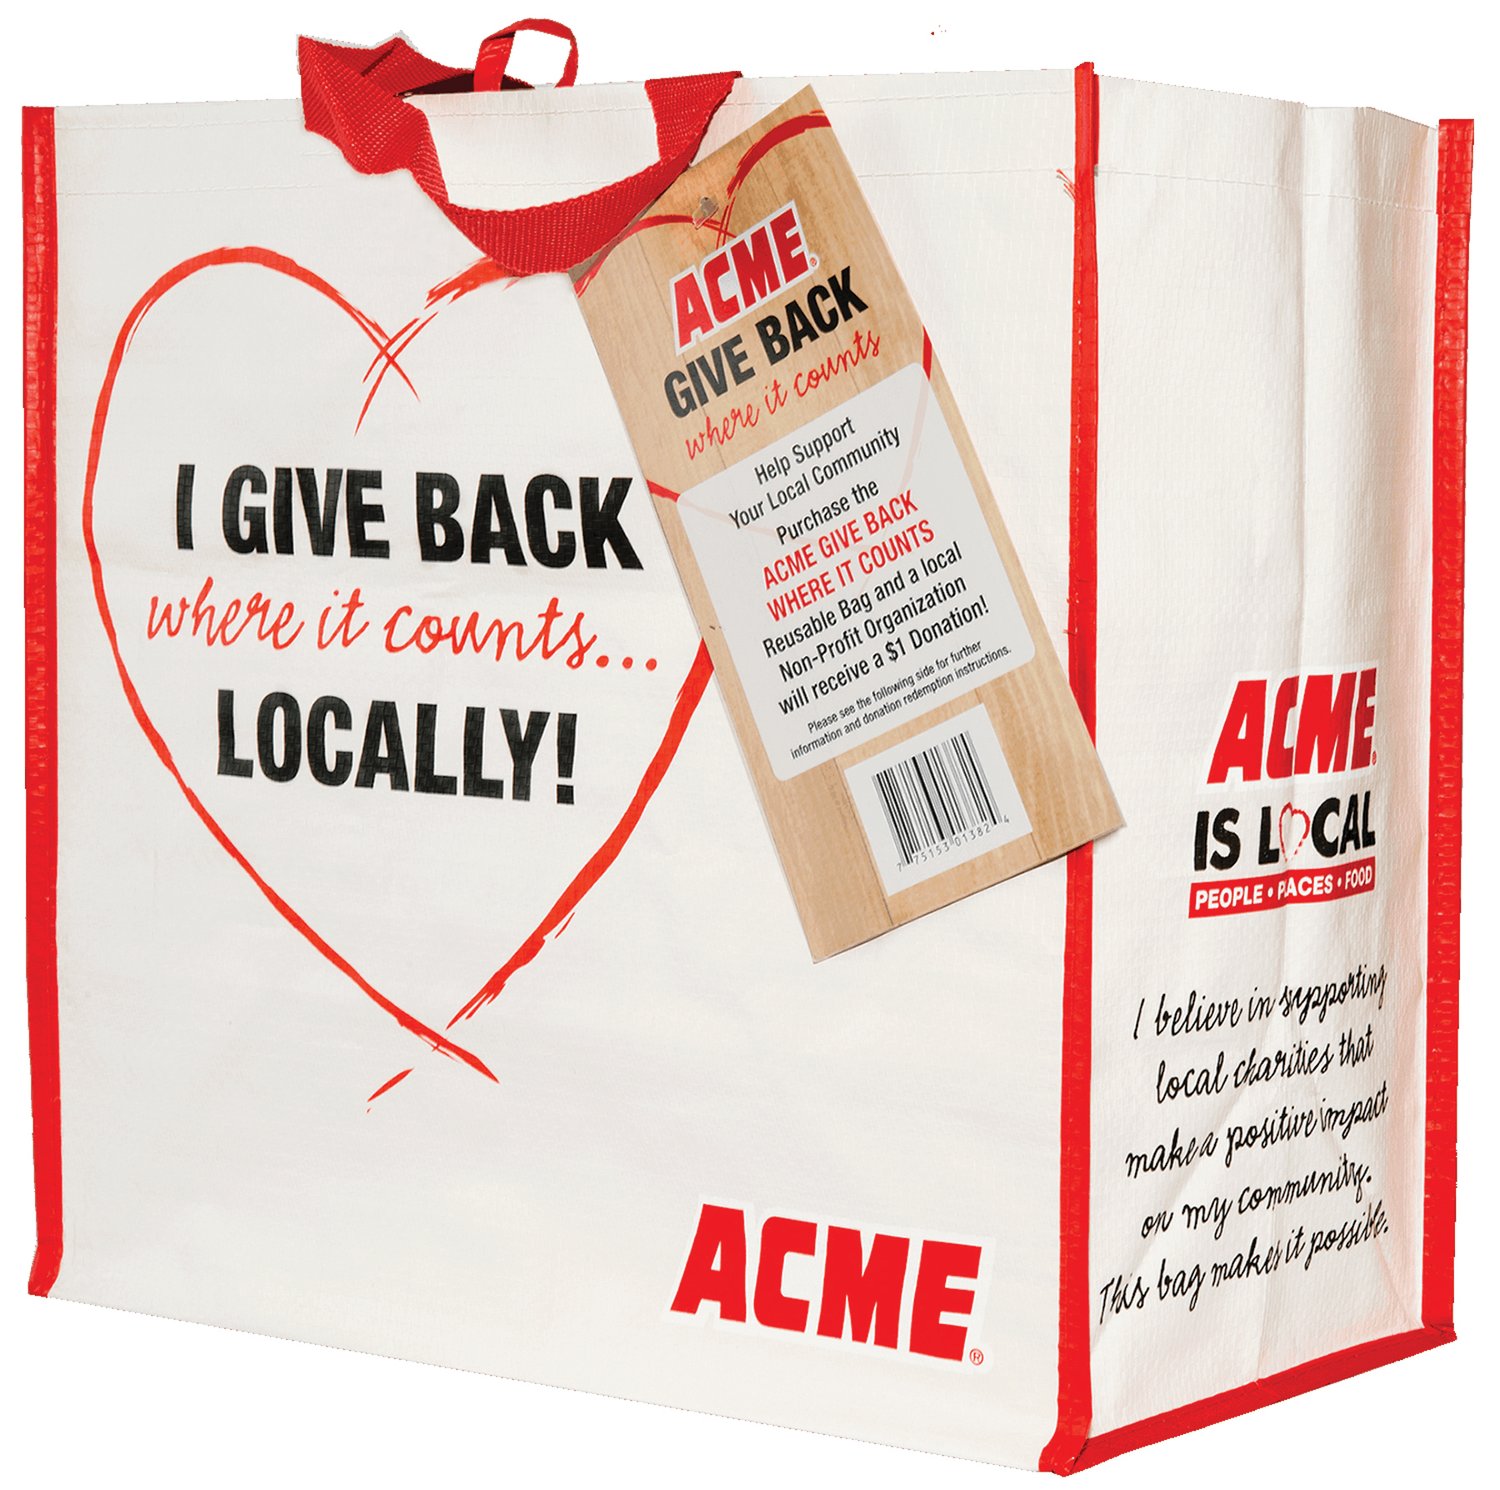 The ACME Bags 4 My Cause Program will benefit the Newtown Community Foundation in January.